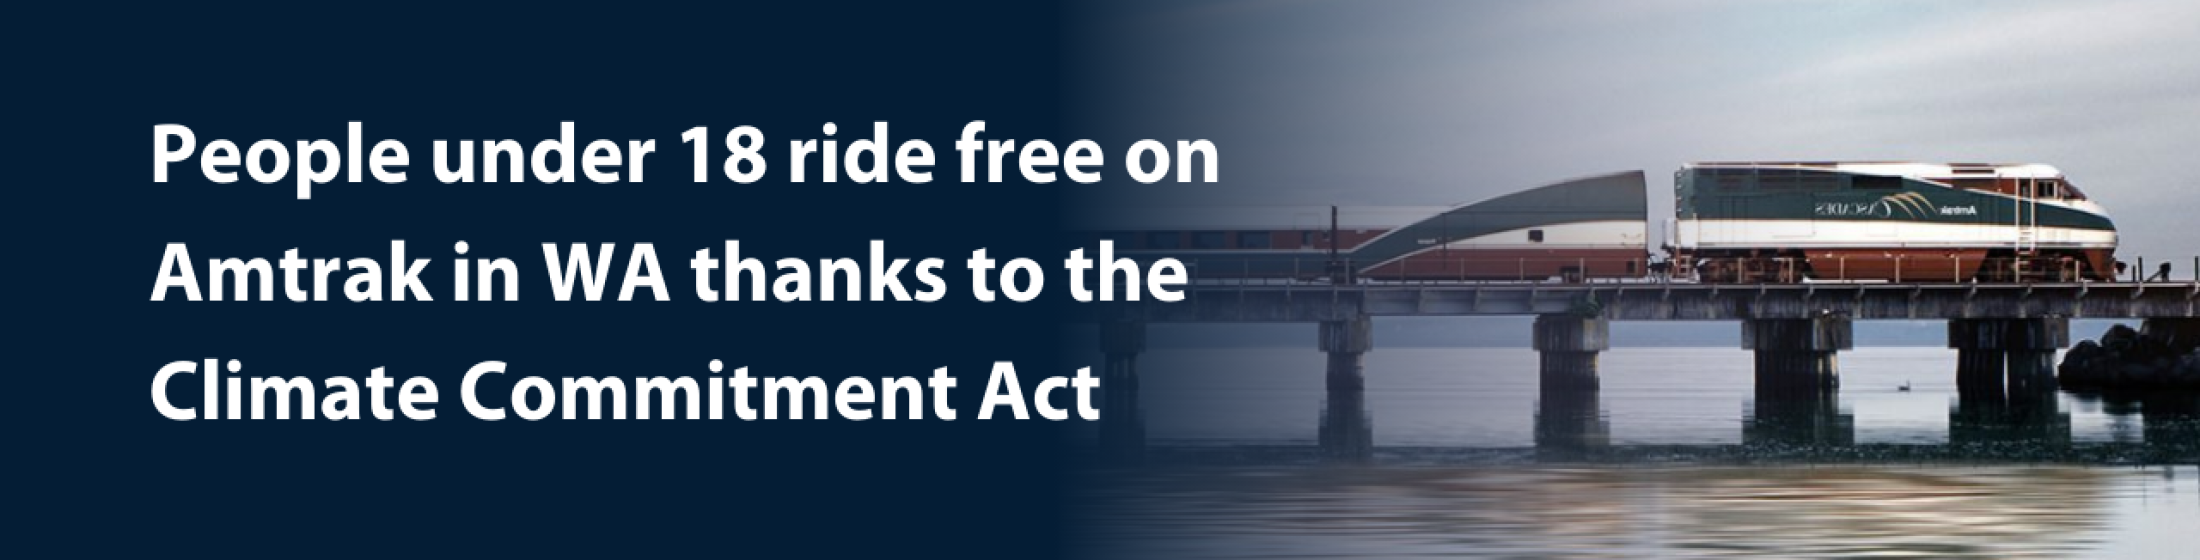 People unde 18 ride free on Amtrak in WA thanks to the Climate Commitment Act